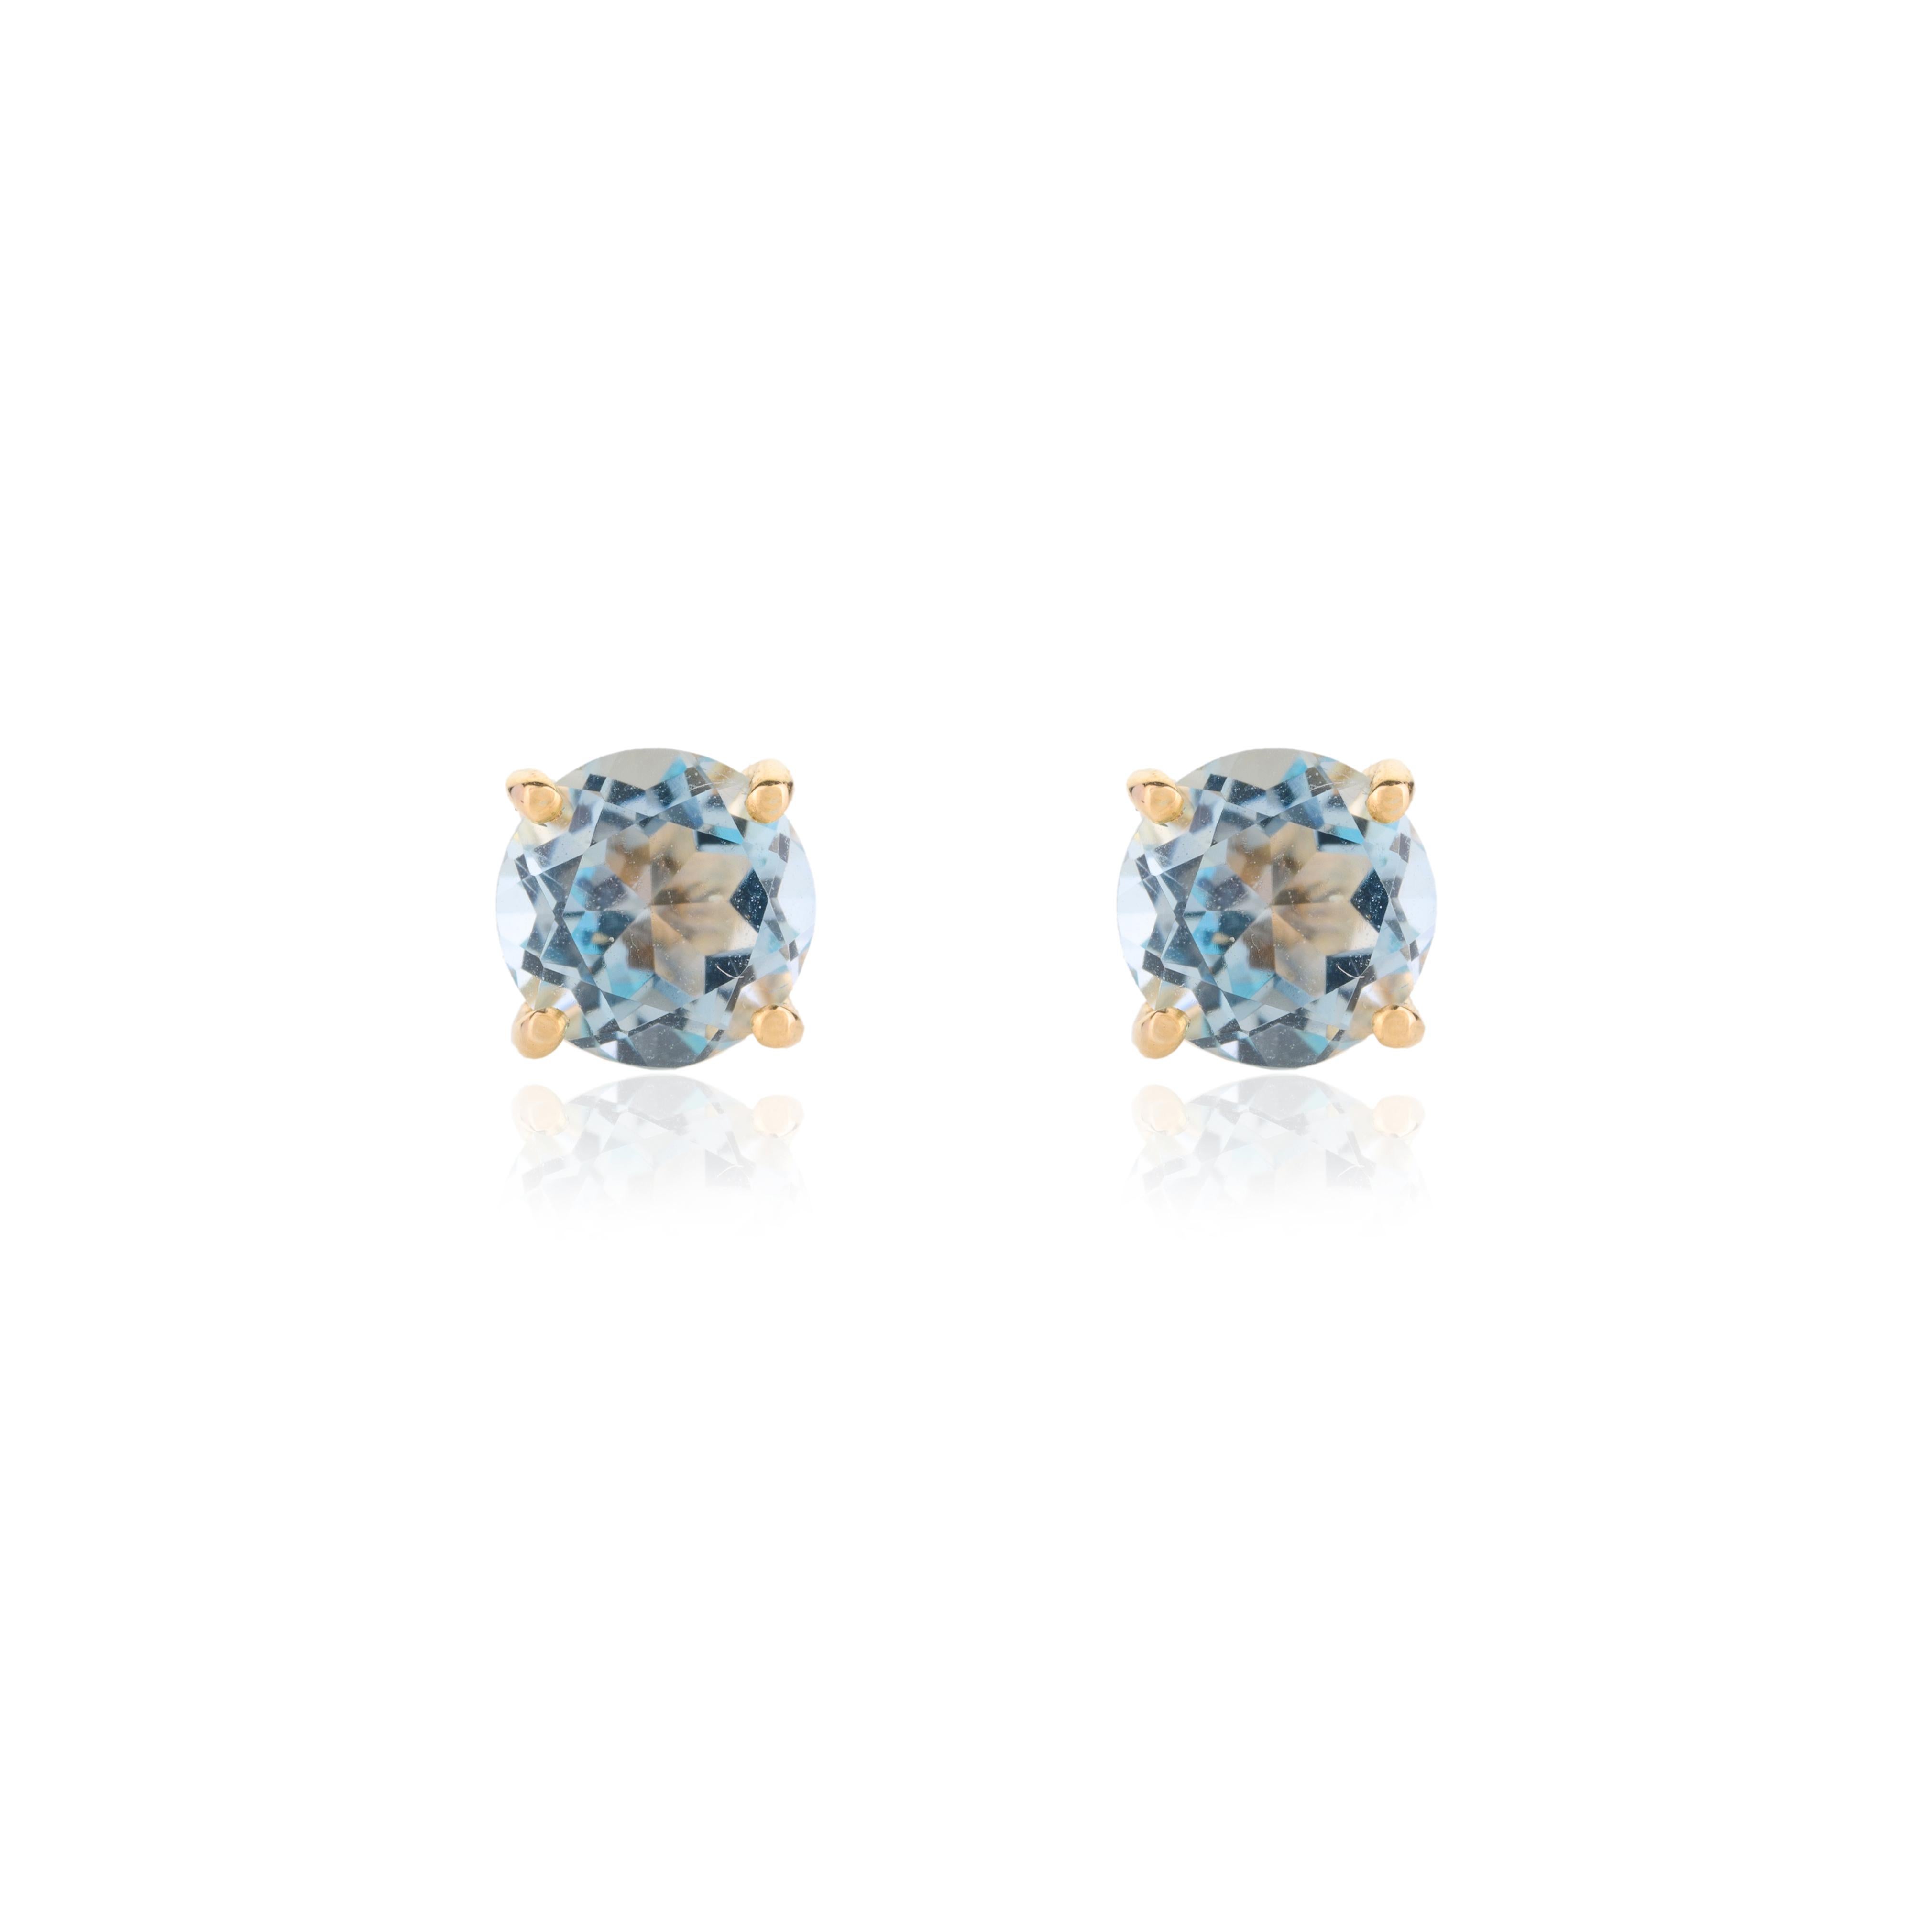 Round Cut 2.13 Carats Blue Topaz Pushback Stud Earrings for Her in 14k Solid Yellow Gold For Sale